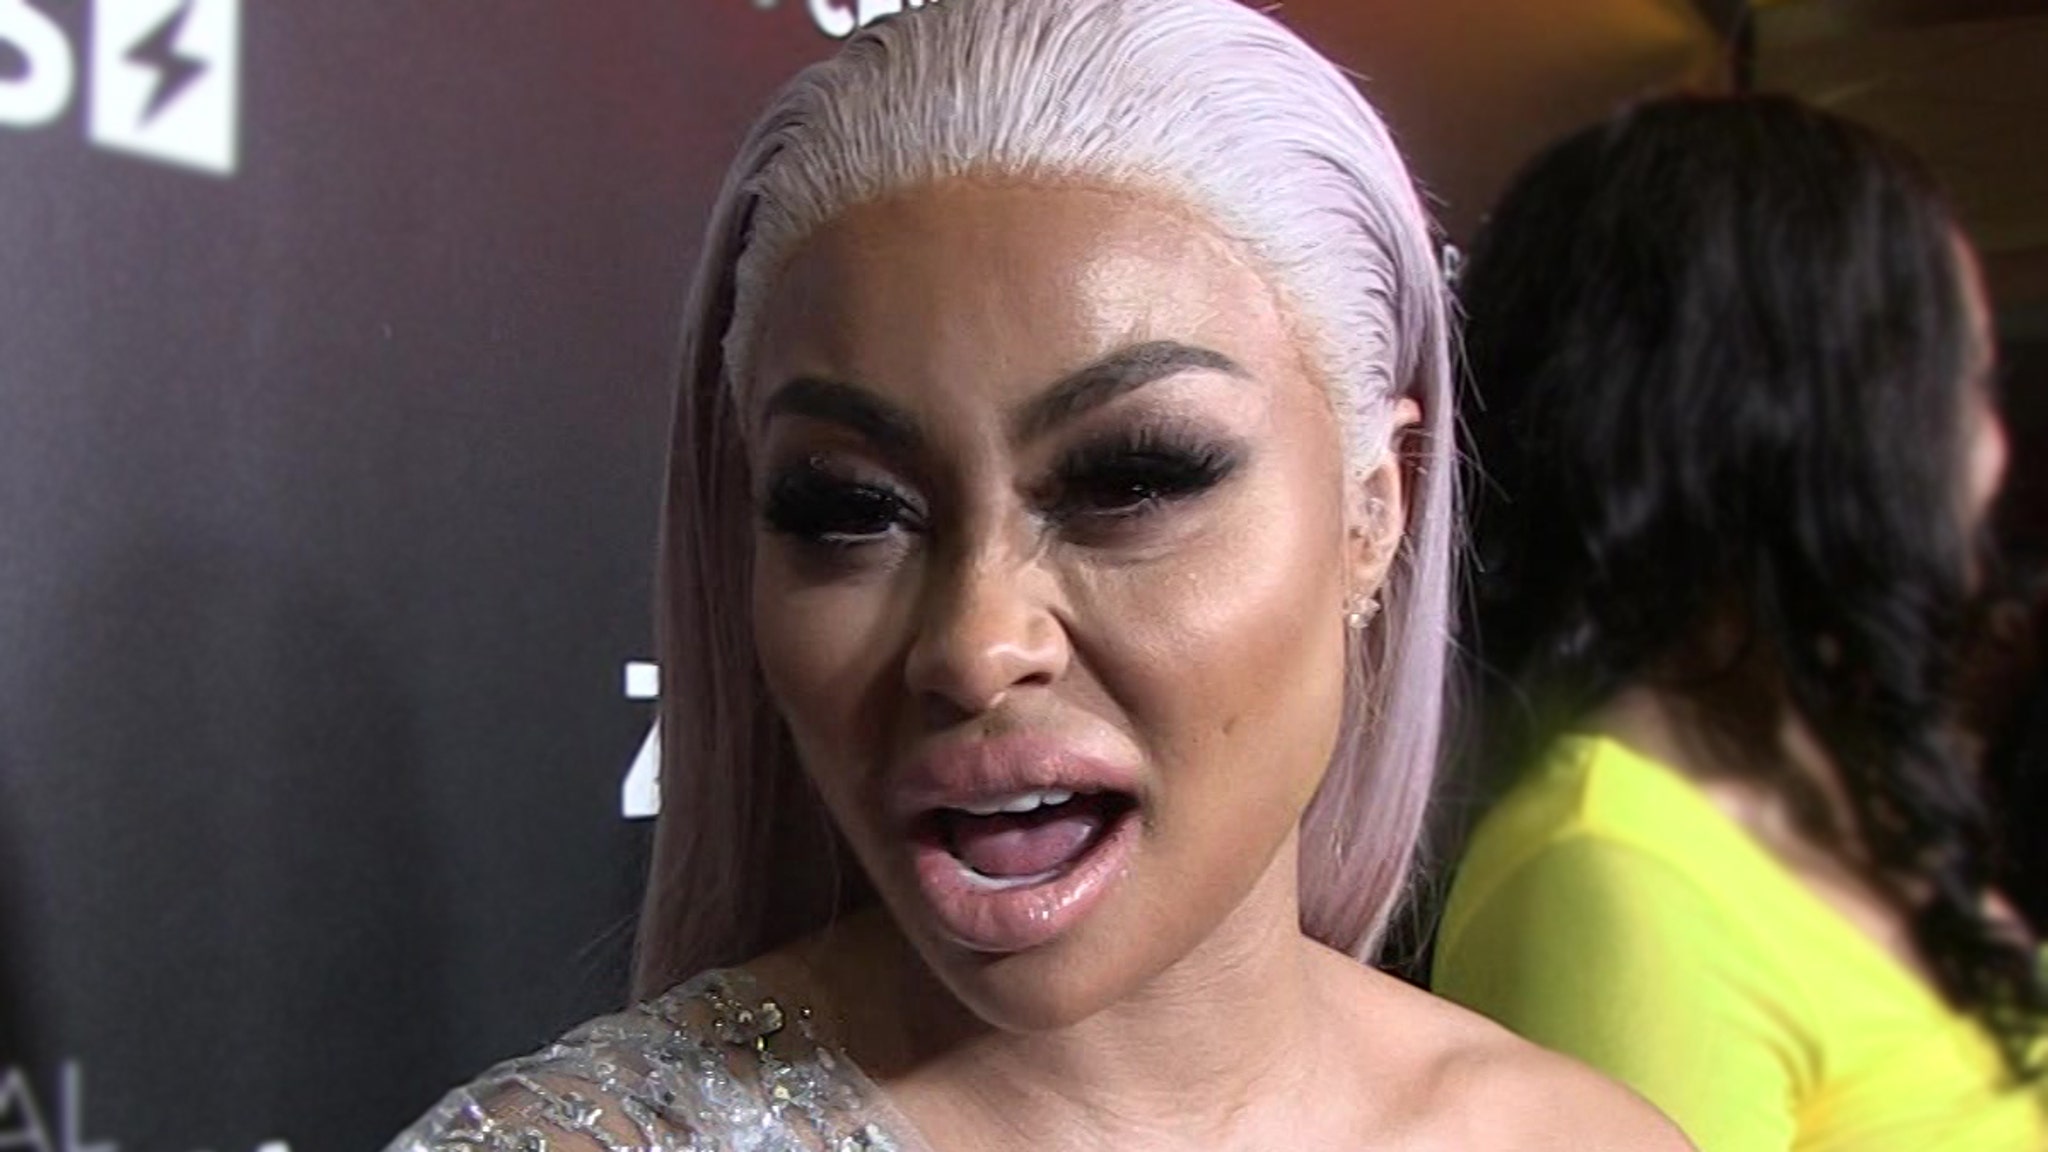 Blac Chyna Ordered to Pay Former Landlord $72,000